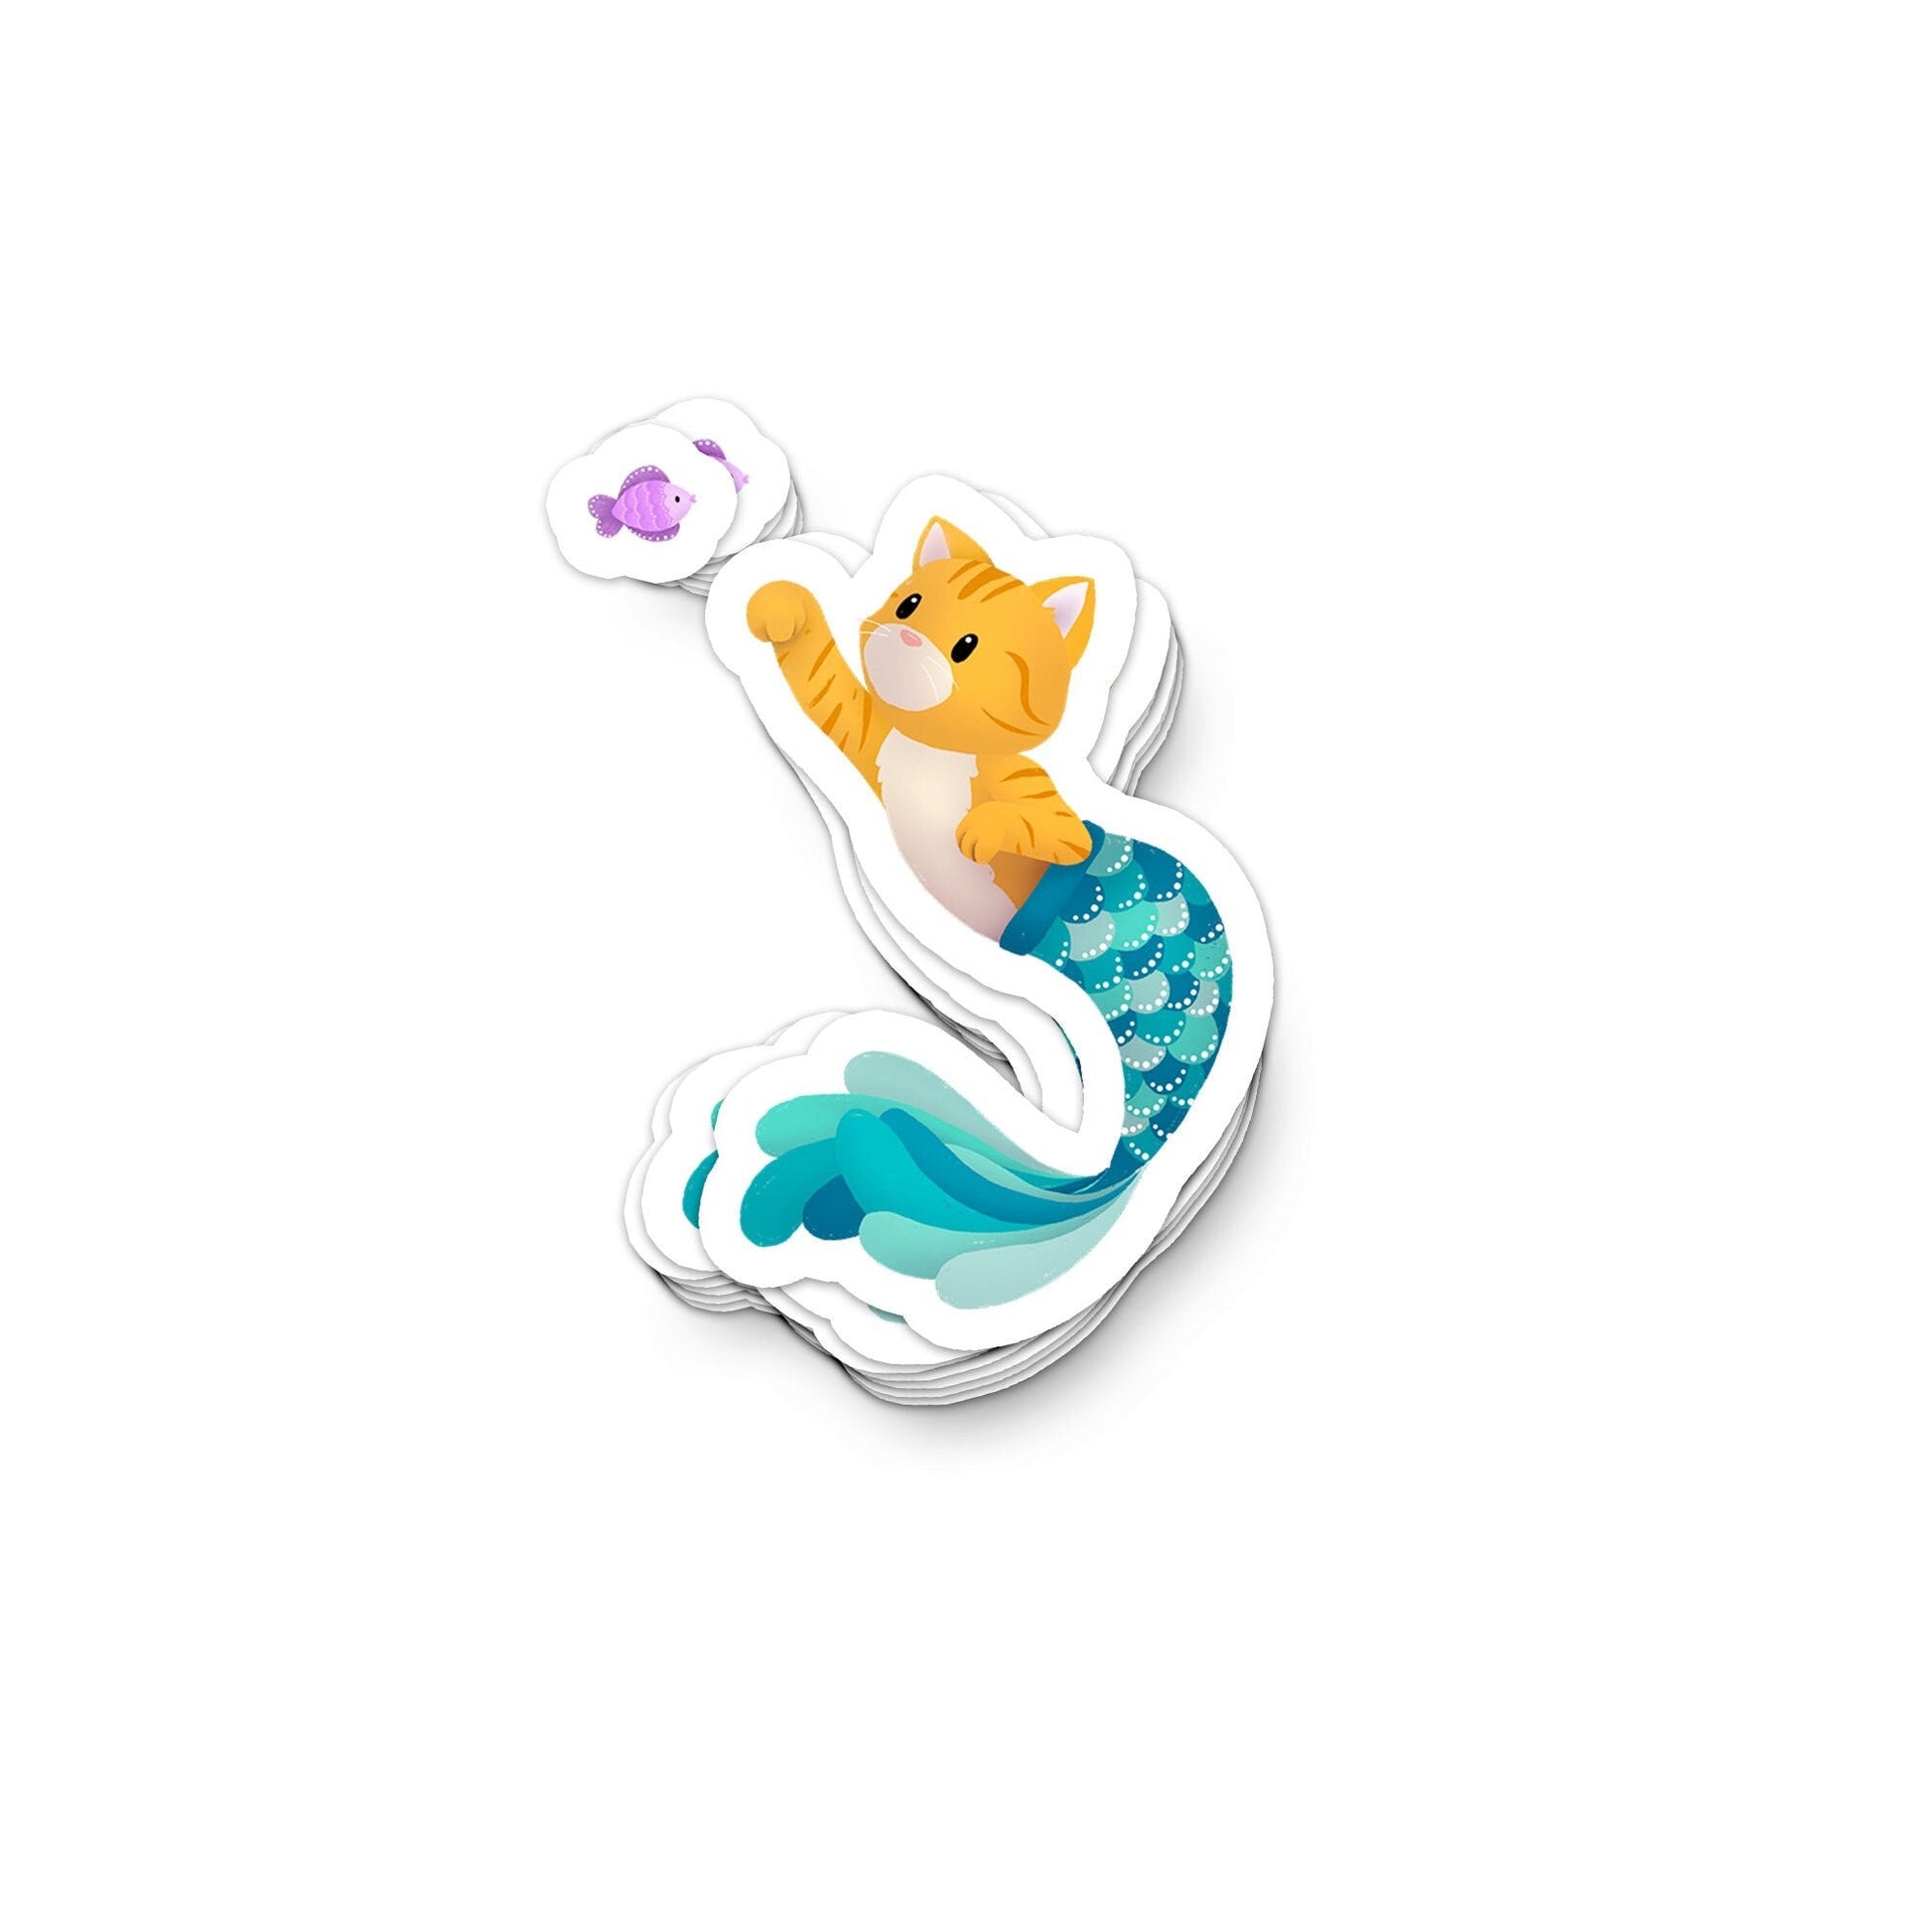 Purrmaid Jude & Purple Fish (Ginger Tabby with Teal Mermaid Tail) - Vinyl Sticker, Stickers, Decorative Stickers